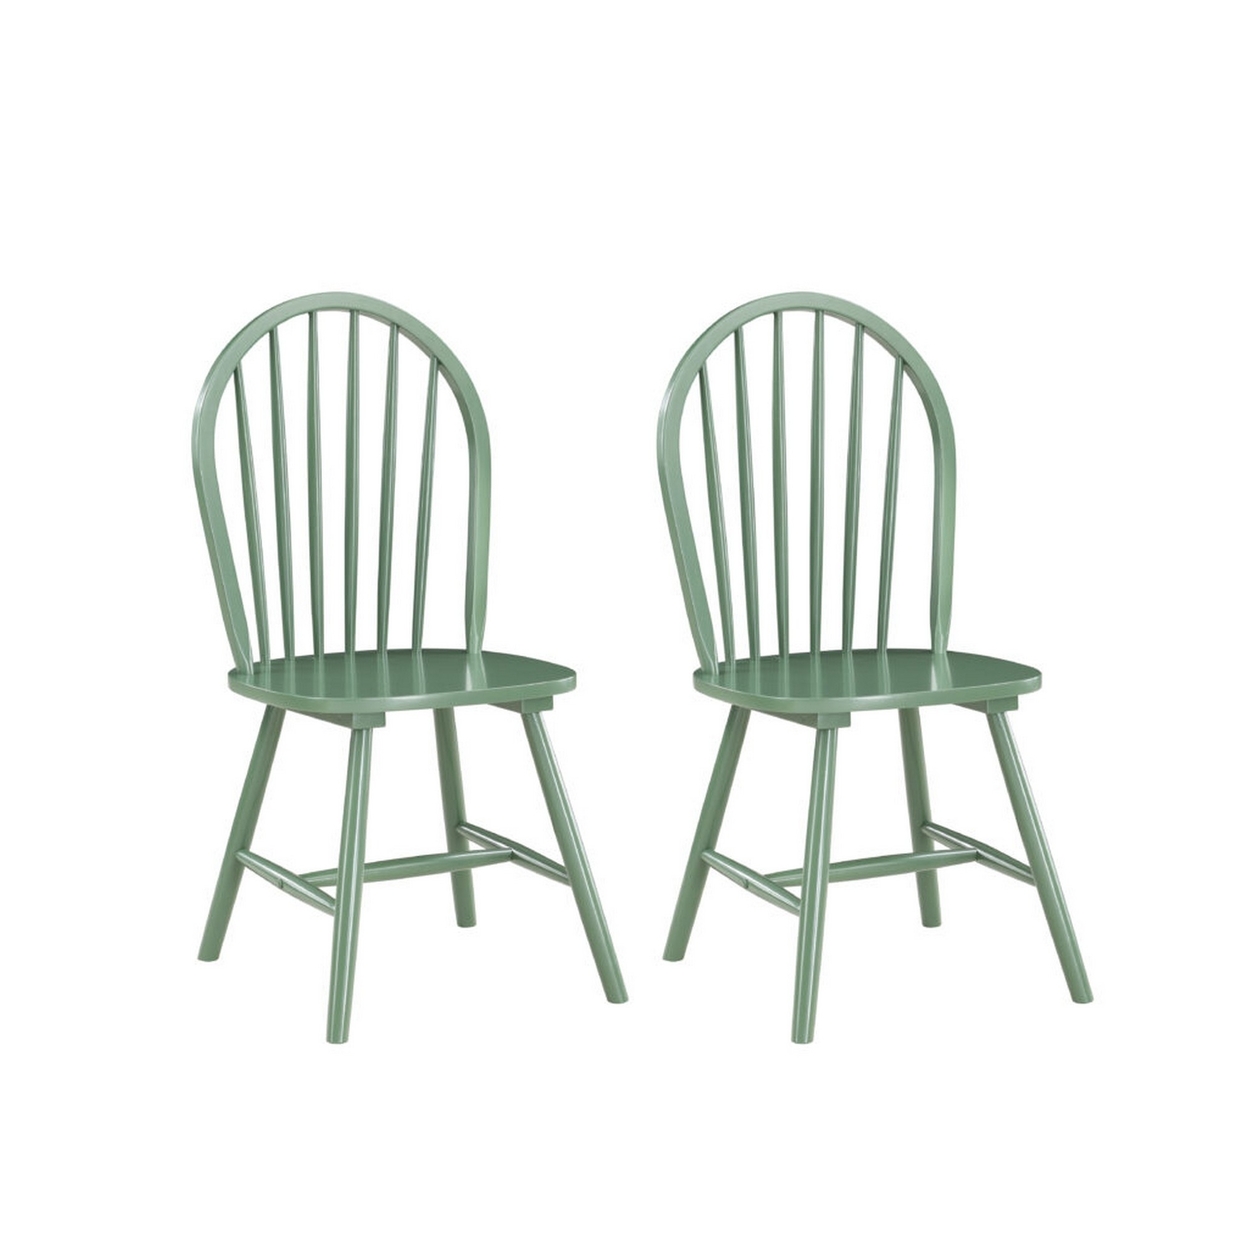 Irvin 18 Inch Modern Dining Chairs, Round Spindle Backs, Set Of 2, Green - Saltoro Sherpi